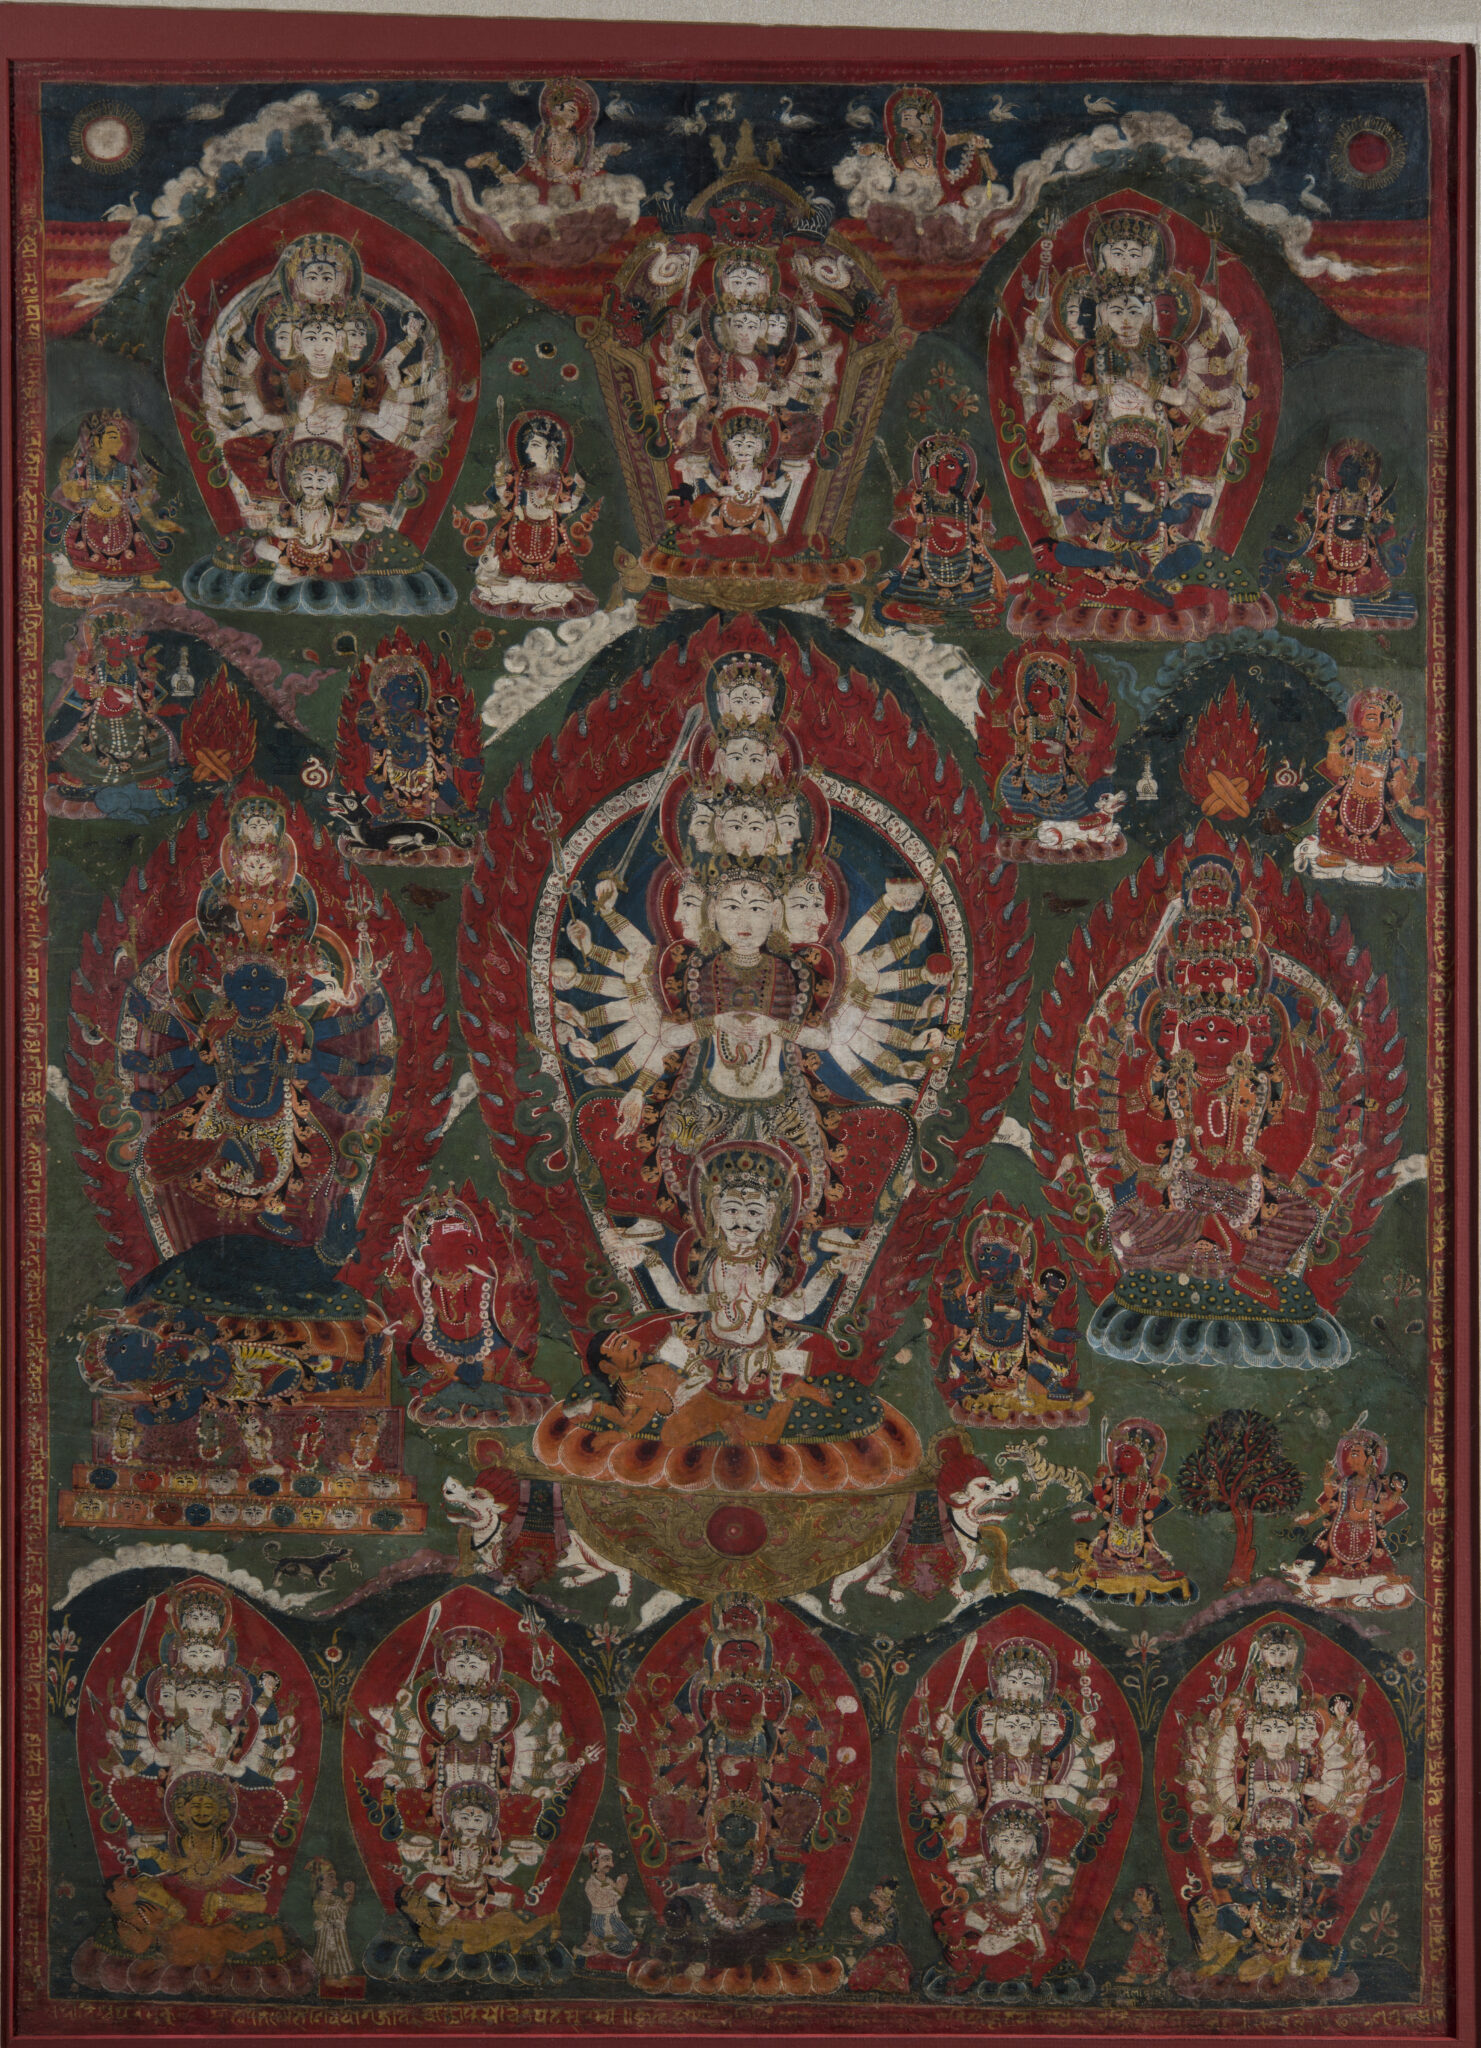 Many-armed and -headed wrathful goddess at center flanked by deities, each framed by fiery nimbus